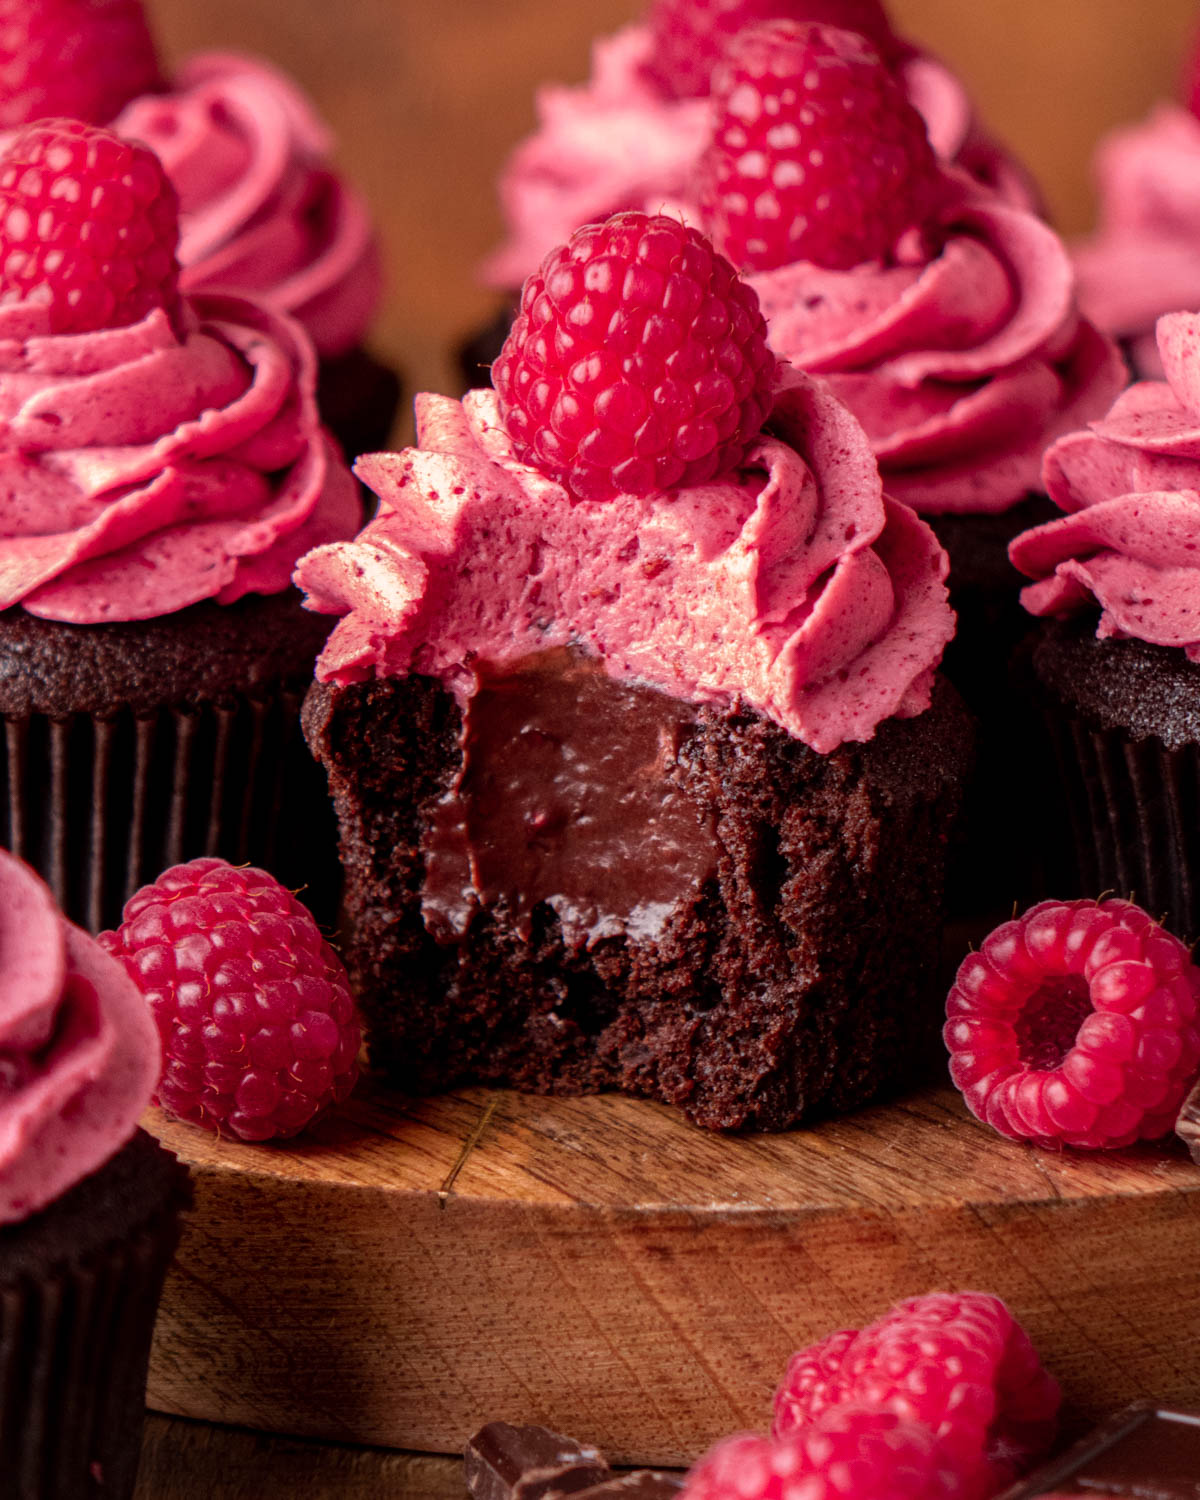 a chocolate raspberry cupcake with a bite taken out to reveal a ganache center with other cupcakes around